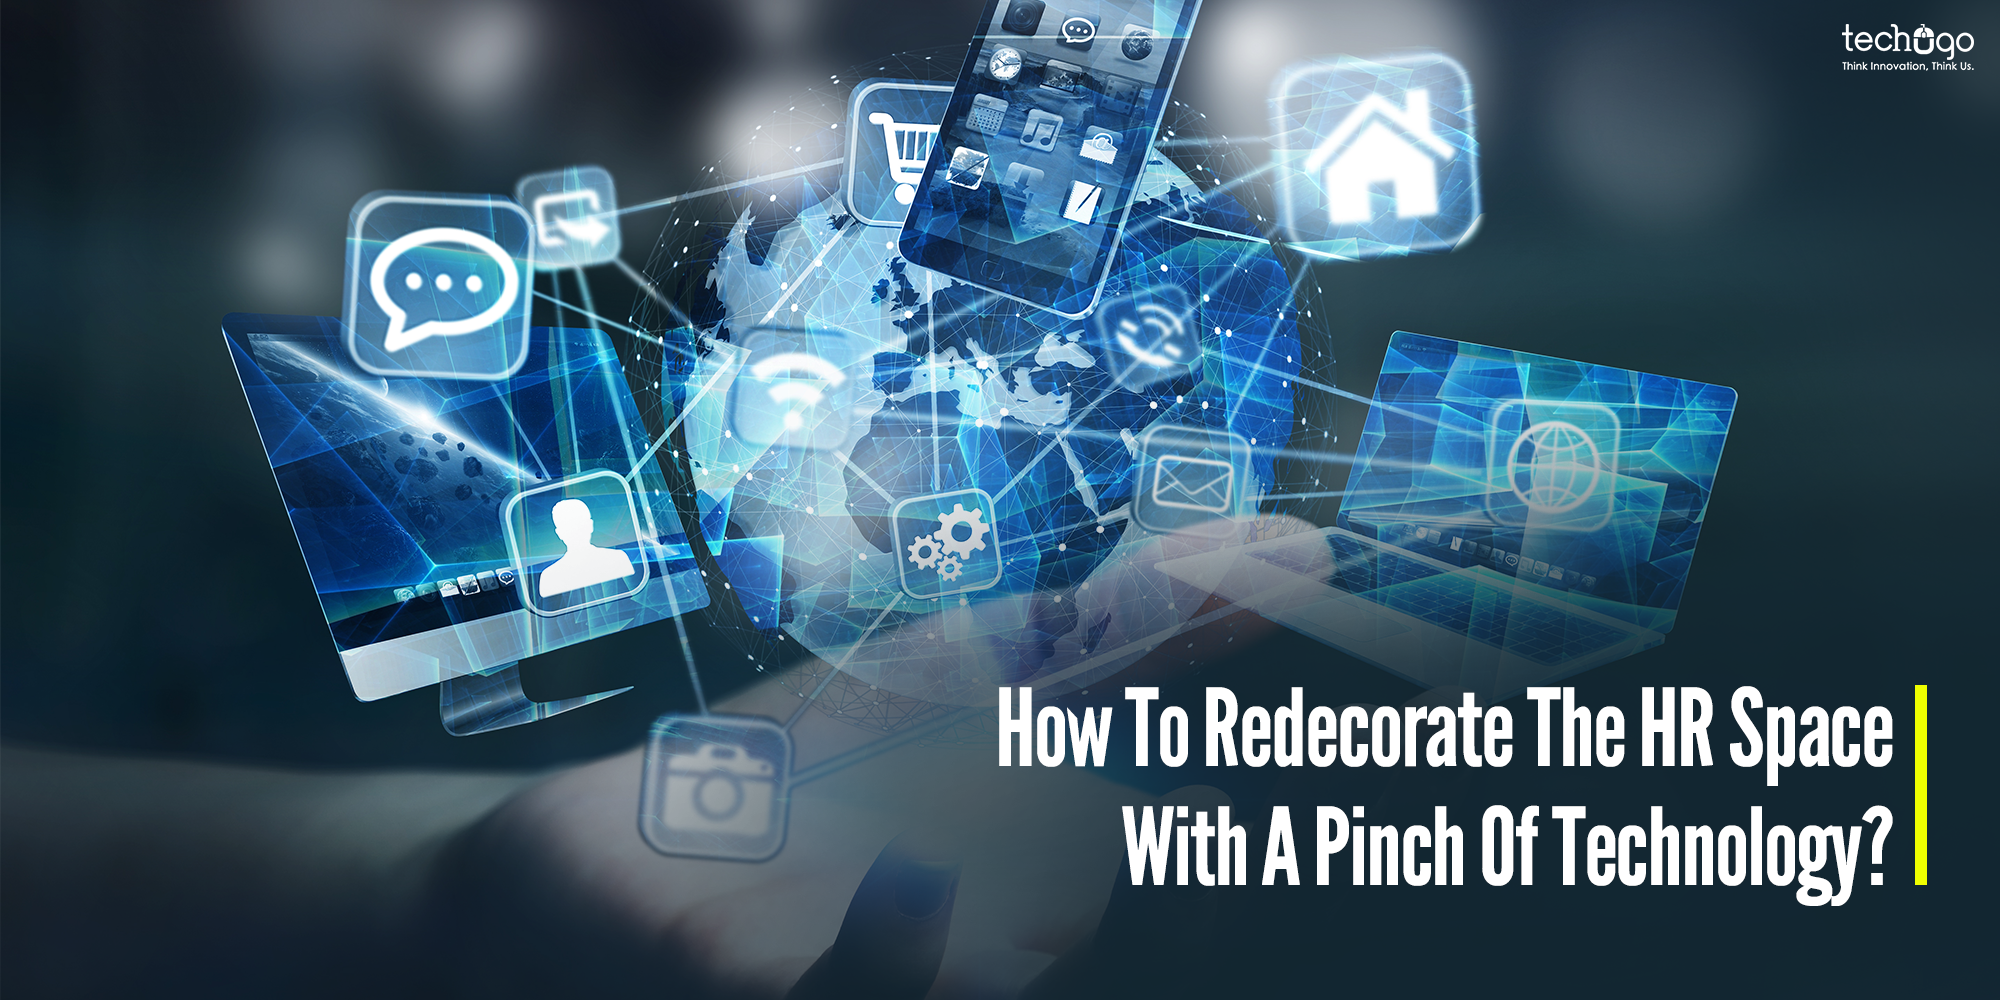 How To Redecorate The HR Space With A Pinch Of Technology?